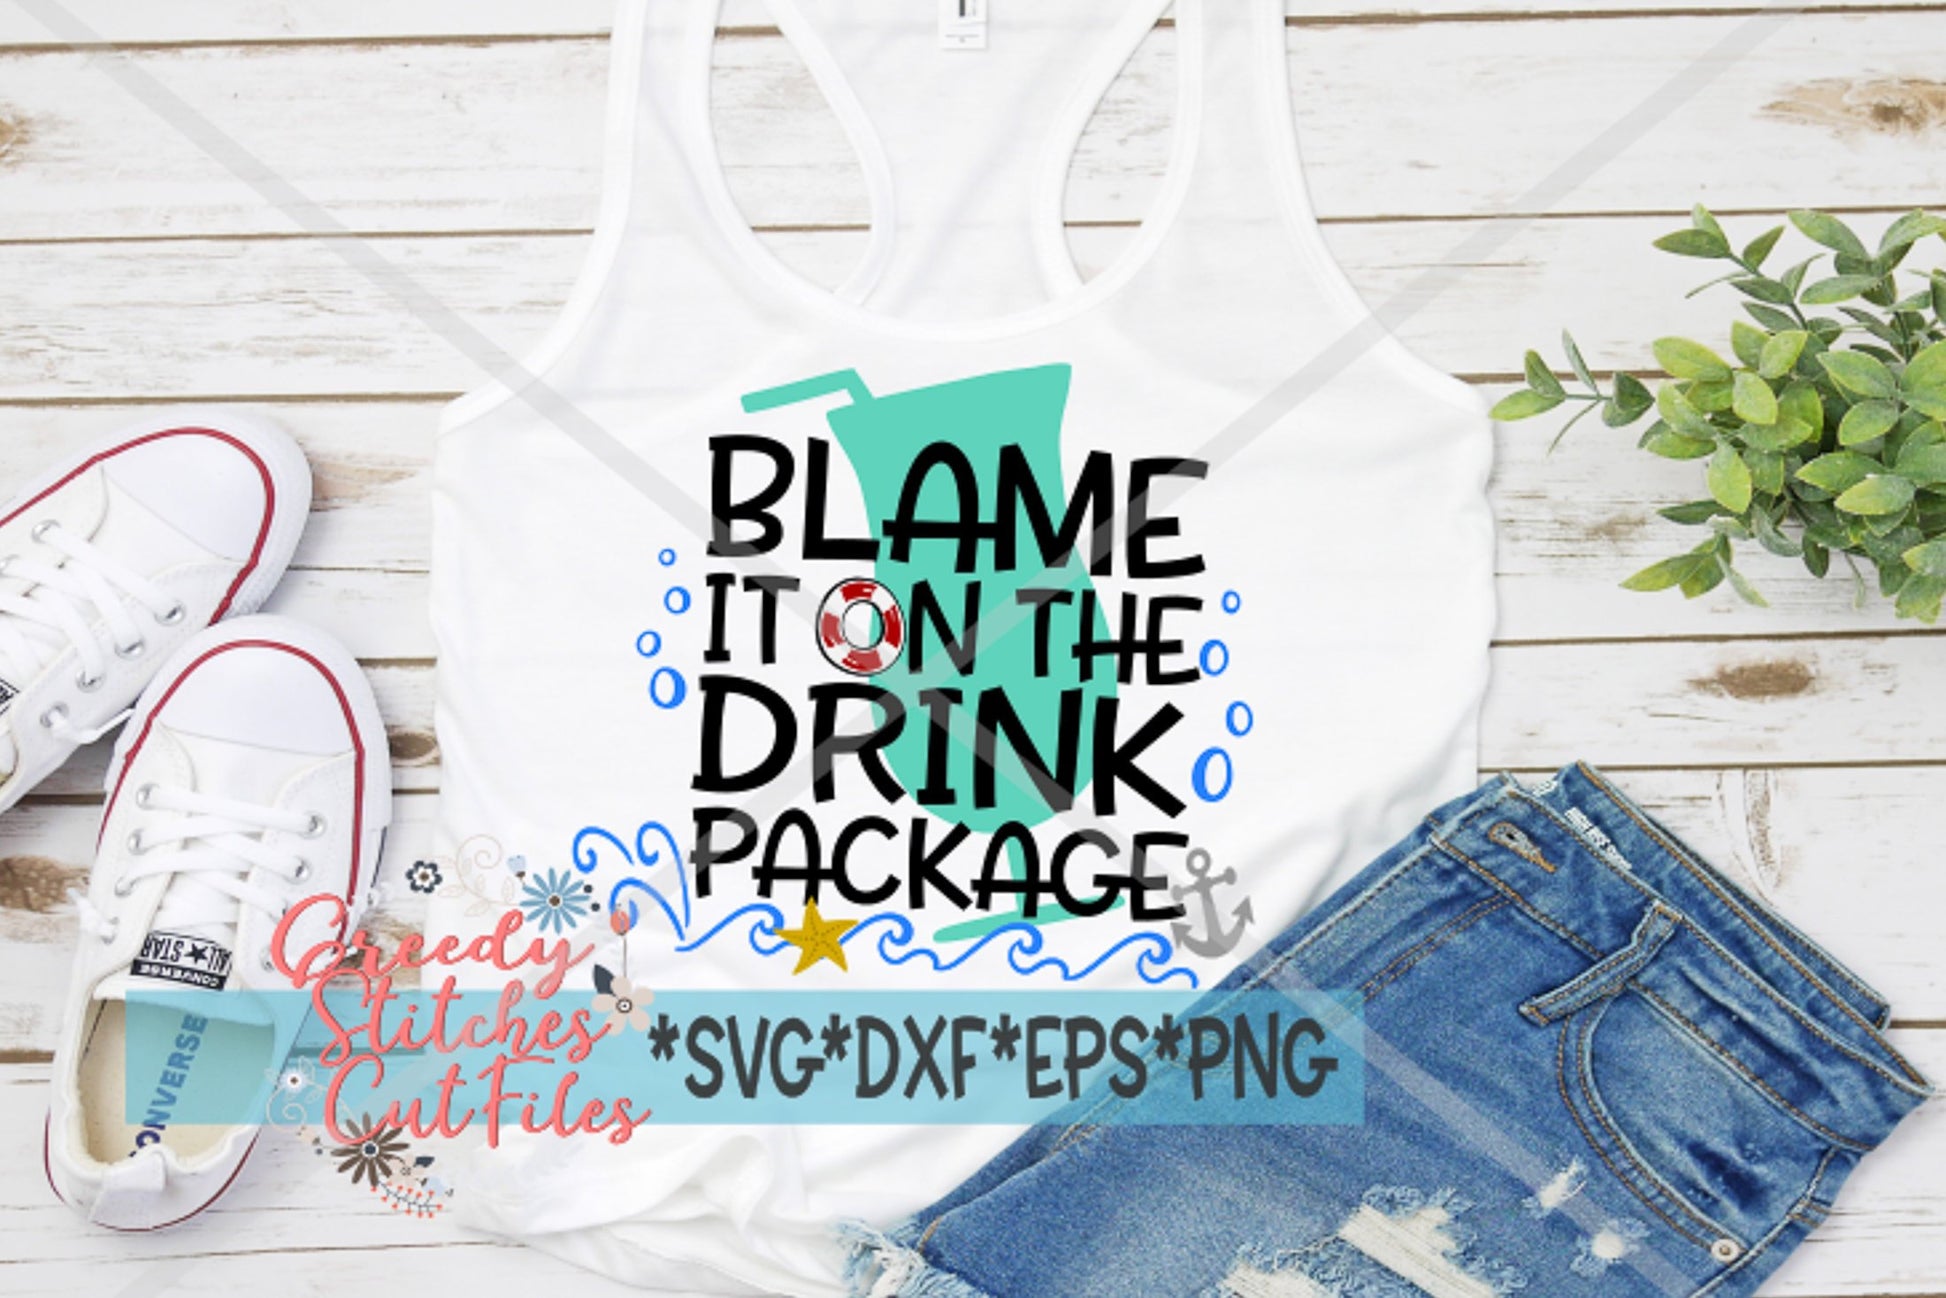 Cruise SvG | Blame It On The Drink Package svg, dxf, eps, png. Cruise SvG | Cheers SvG | Cruising SvG | Instant Download Cut Files.